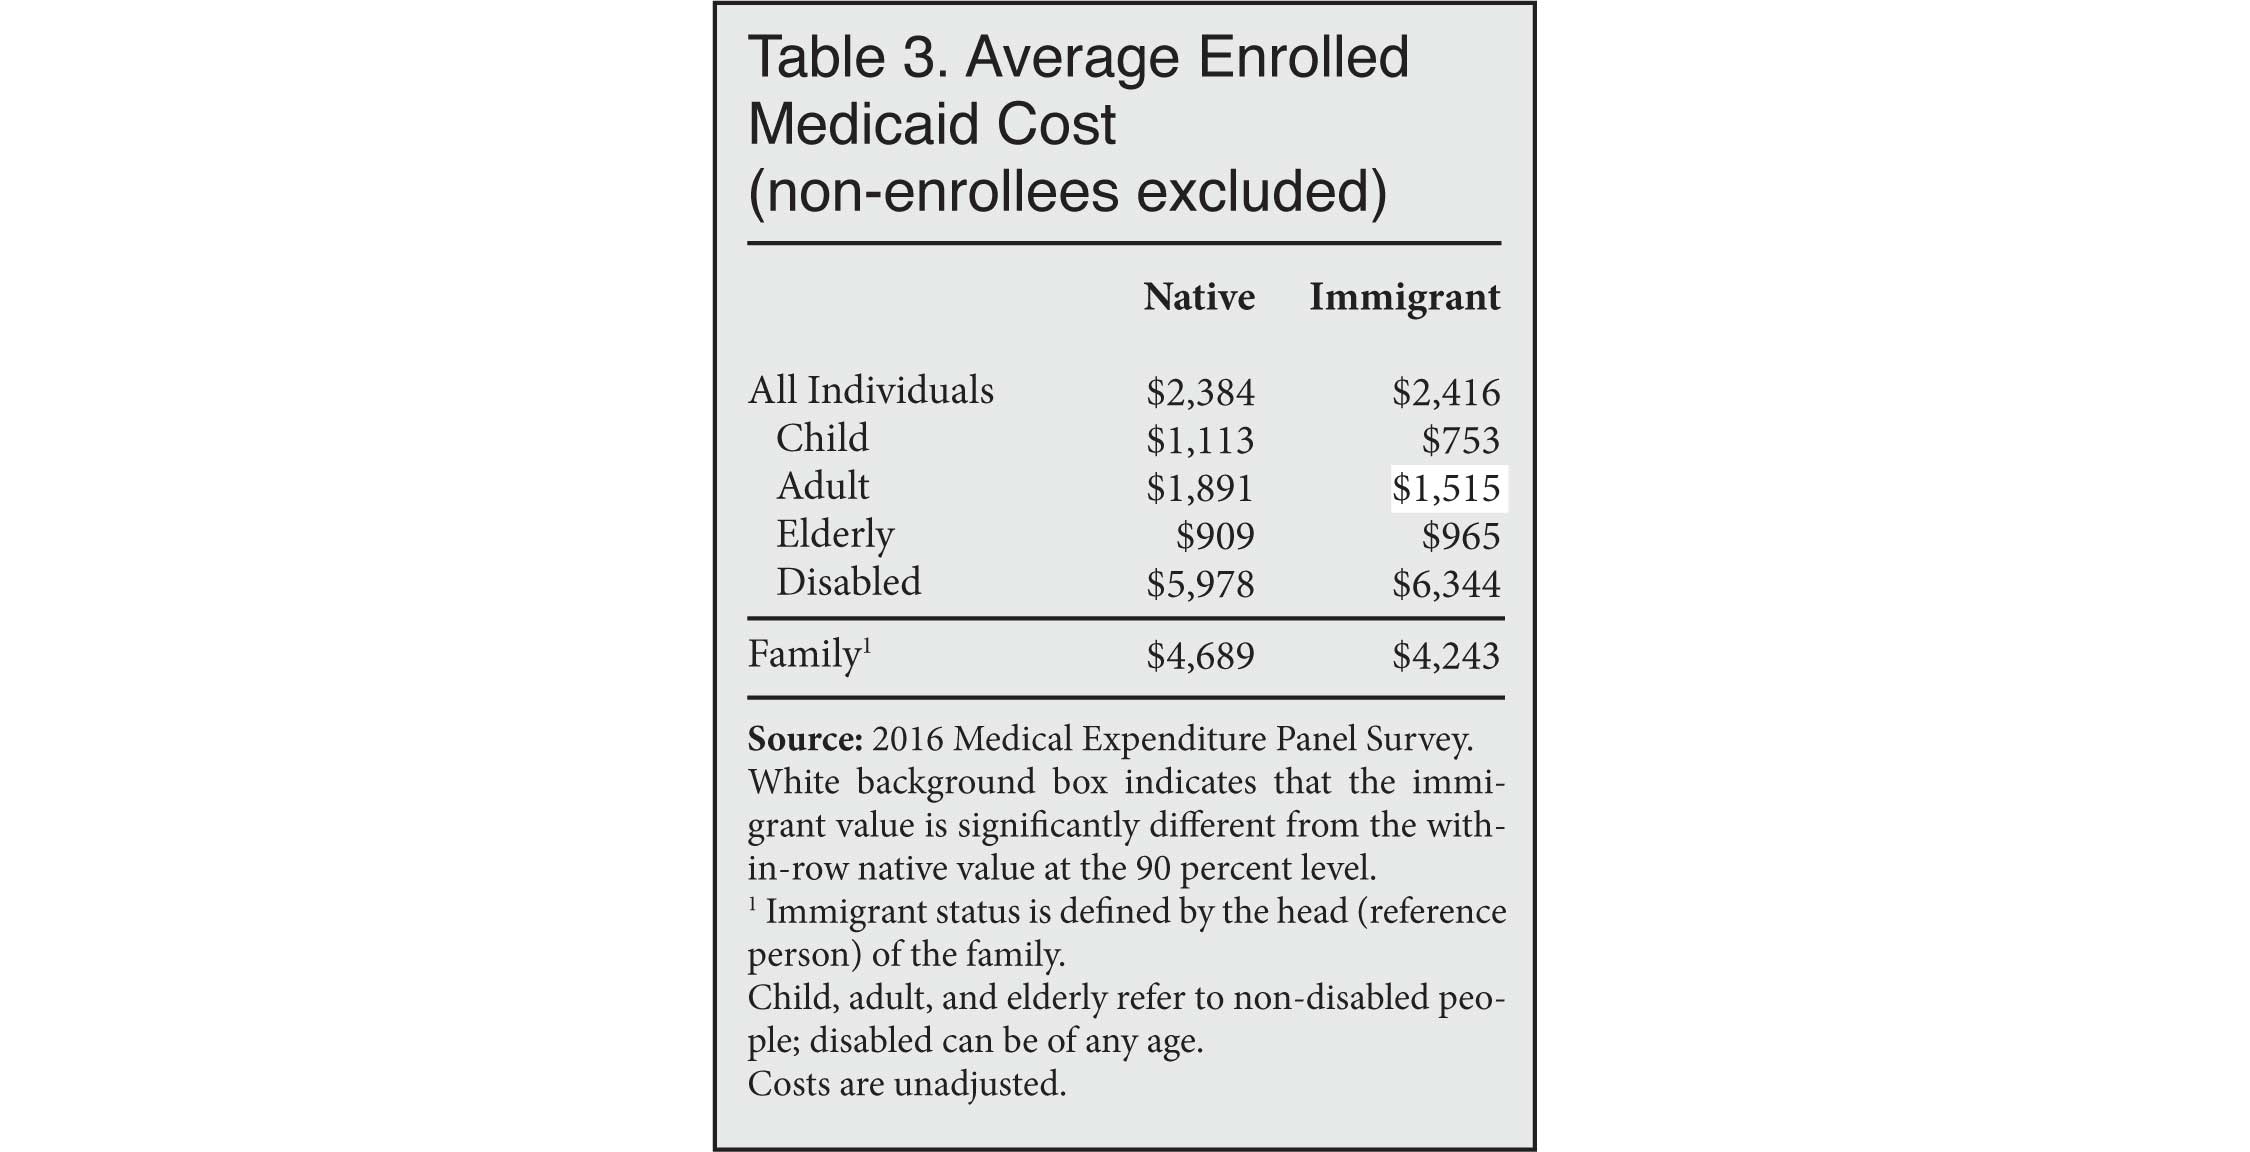 Table: Average Enrolled Medicaid Cost, Immigrants and Natives